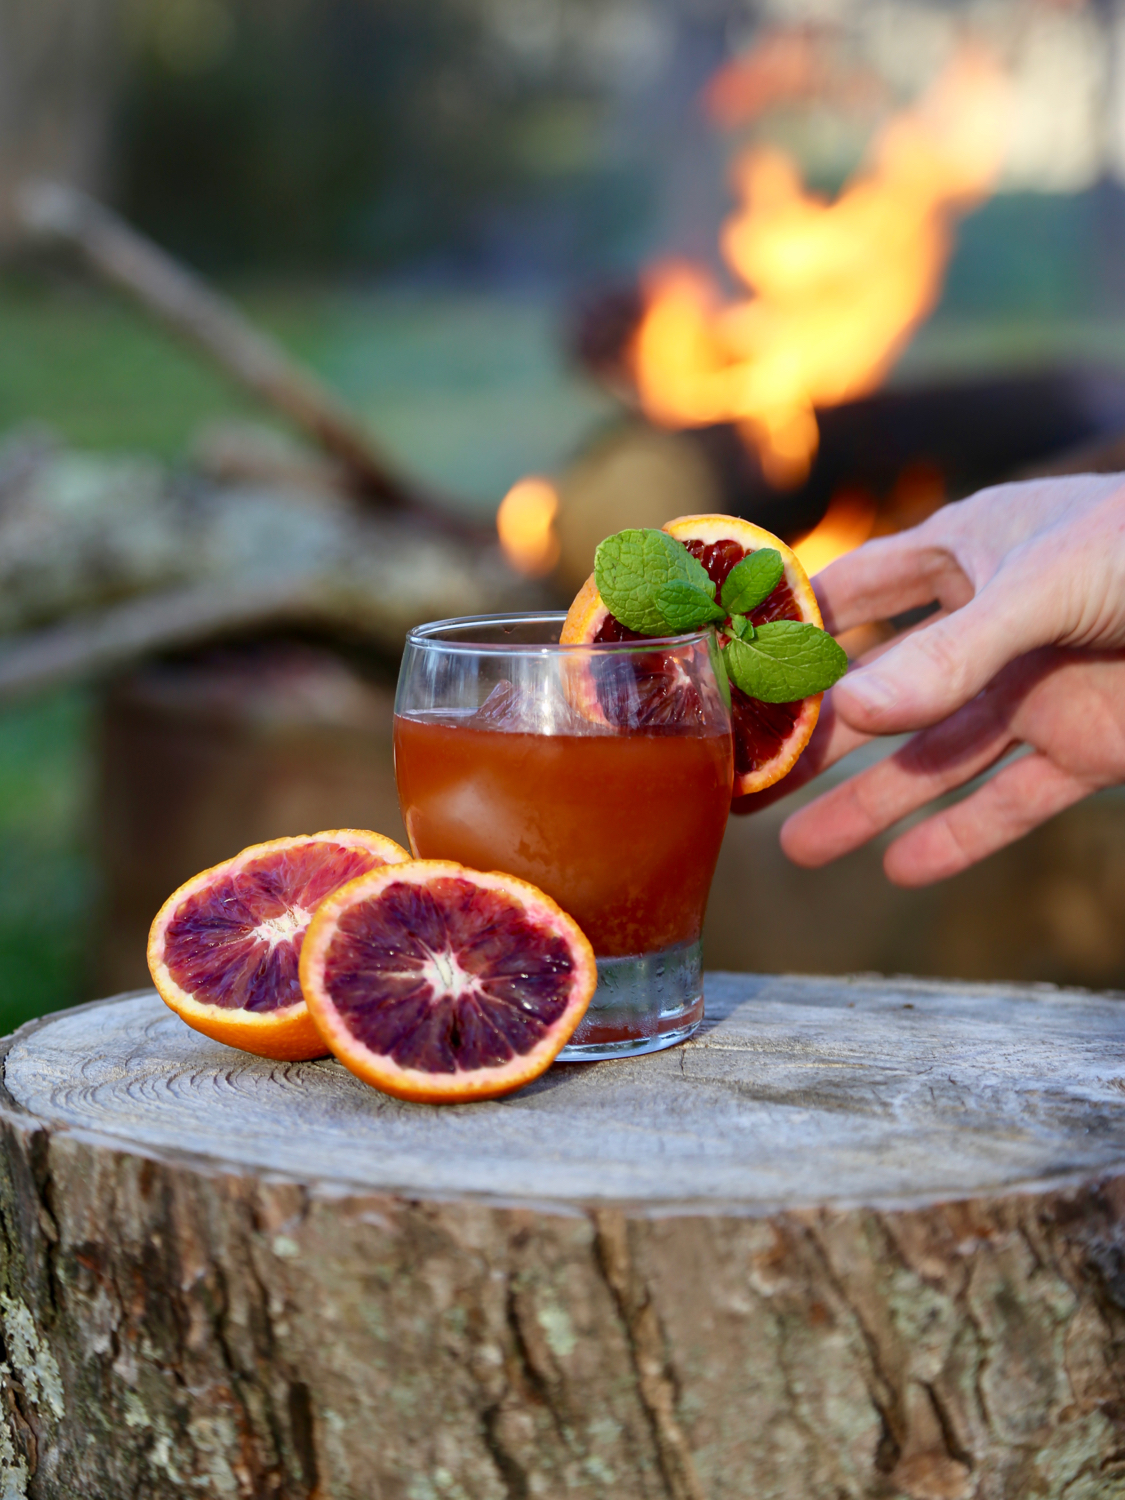 Hand reaching for a glass of blood orange cocktail with a fire in the background